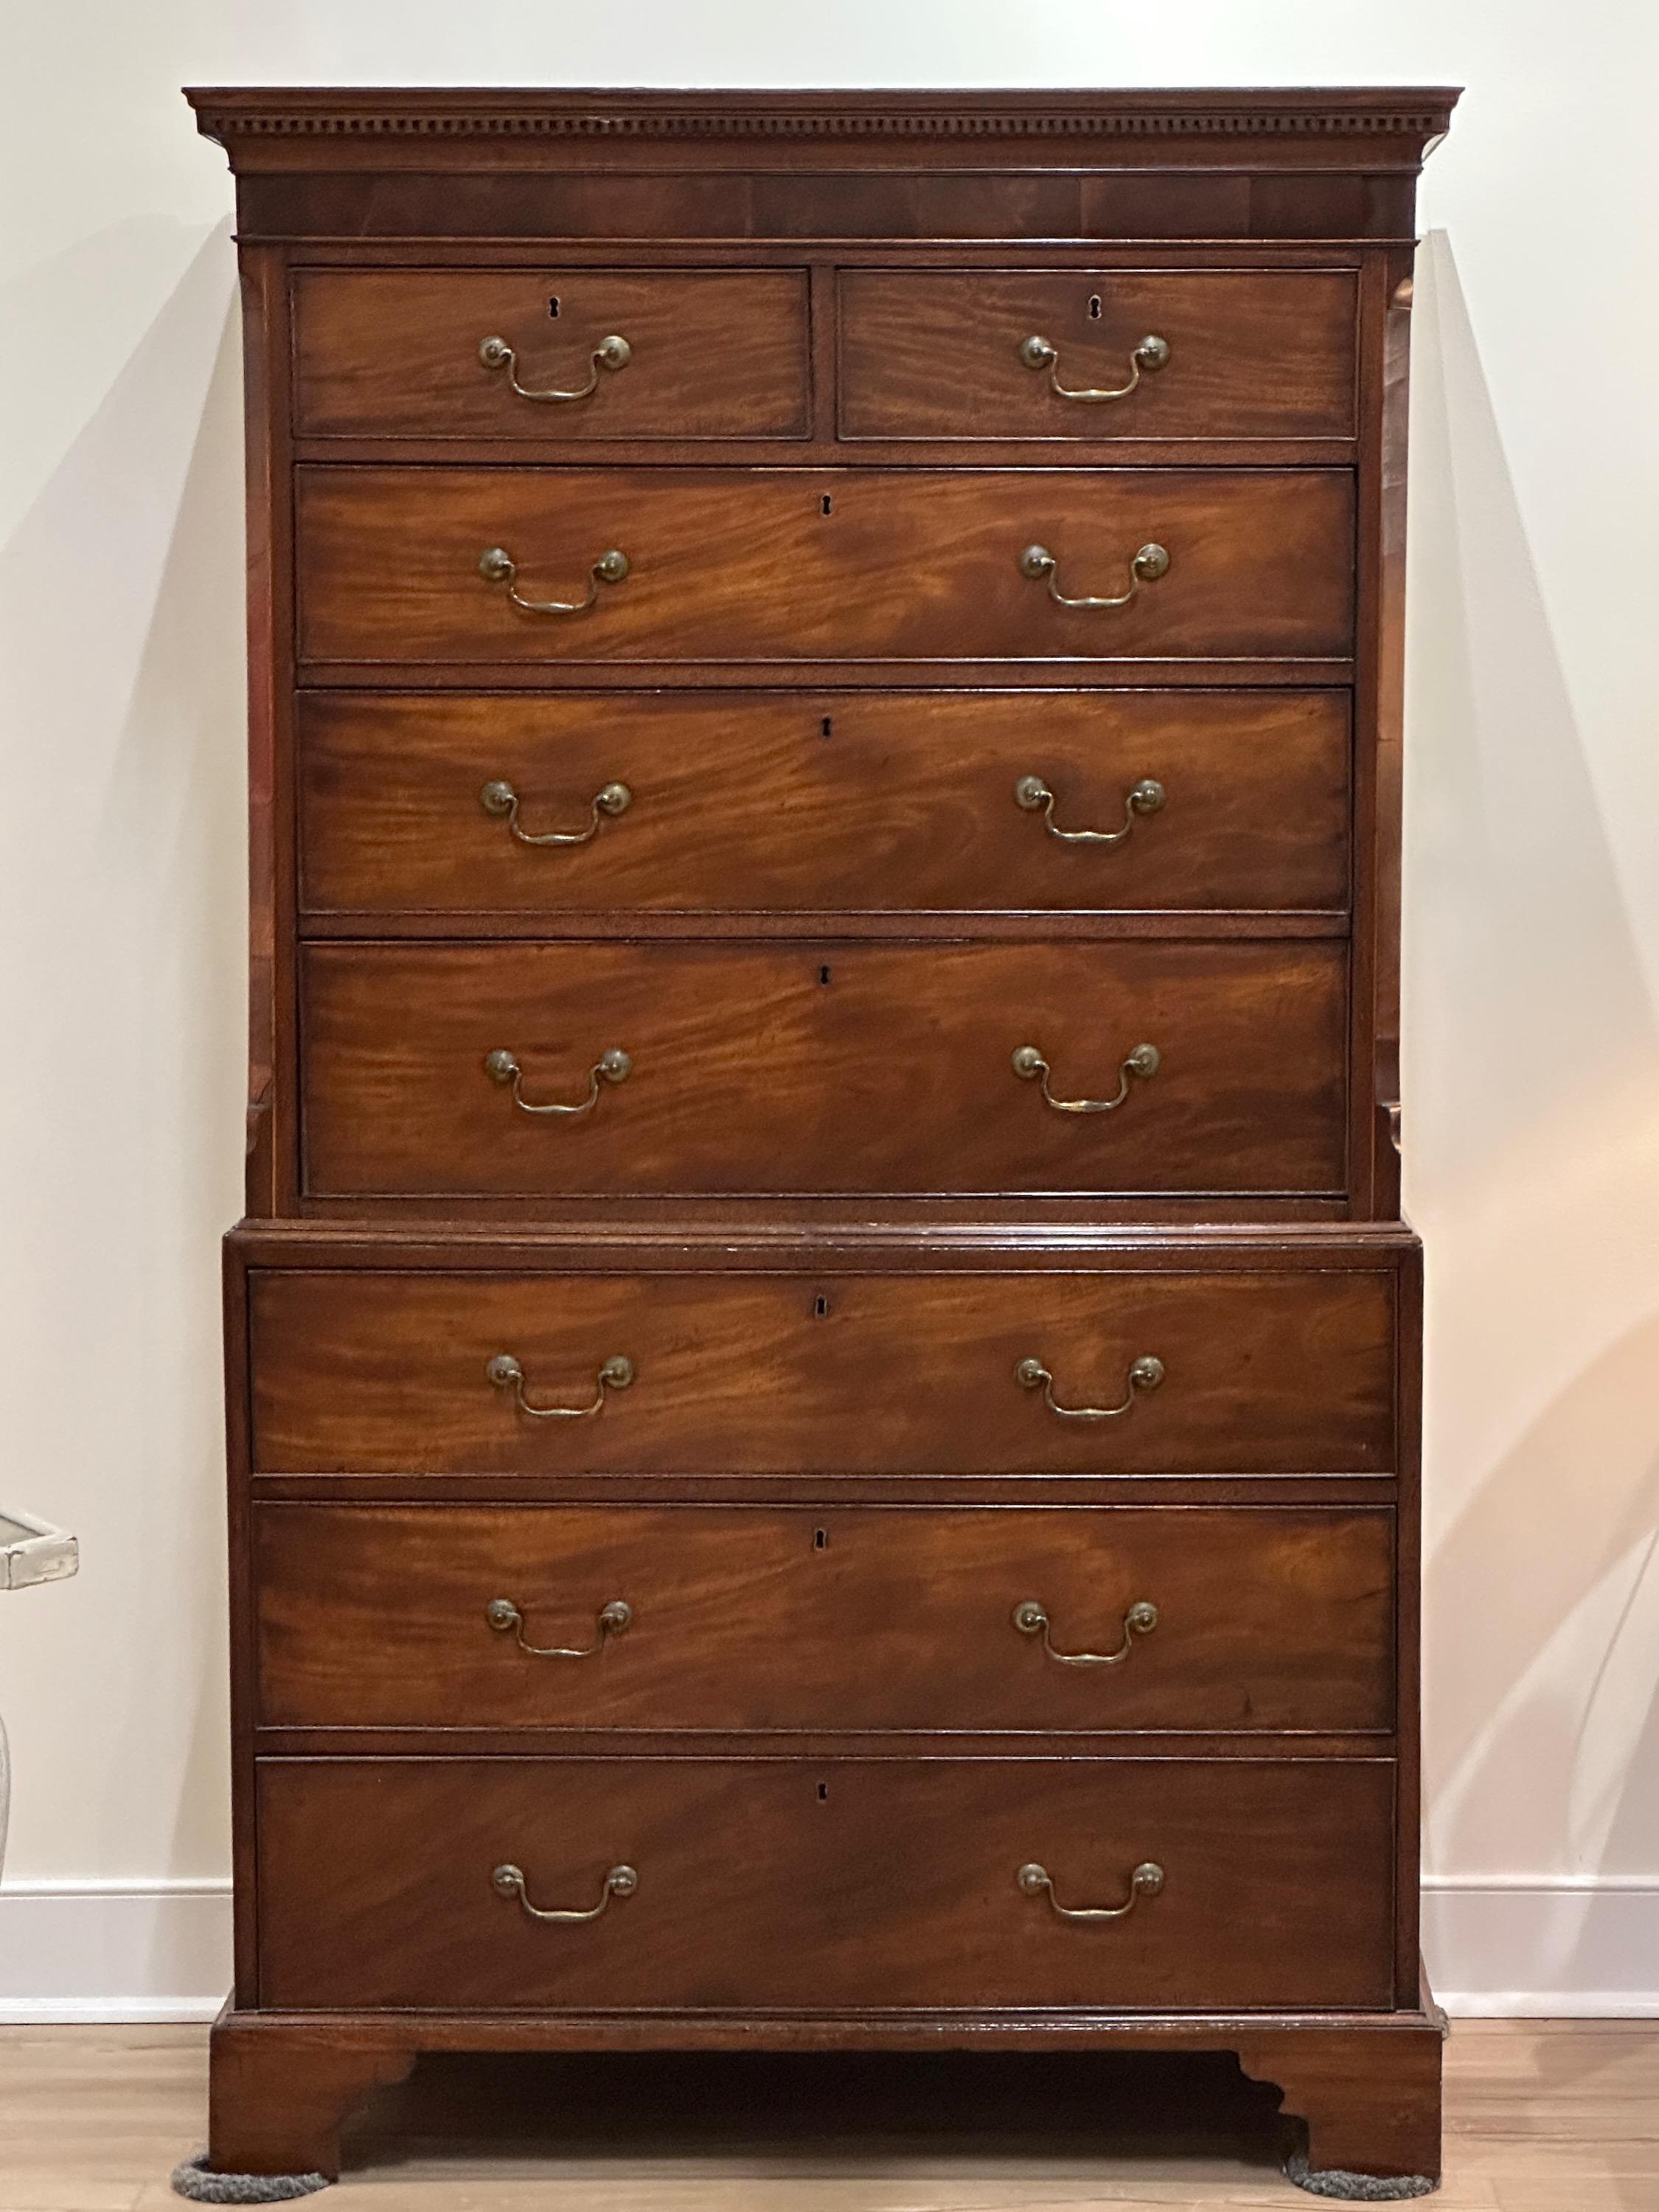 A handsome late 18th C English George III mahogany chest on chest. The upper portion contains two top drawers and three graduated drawers beneath, the lower with three graduated drawers all with original brass pulls on carved bracket feet.